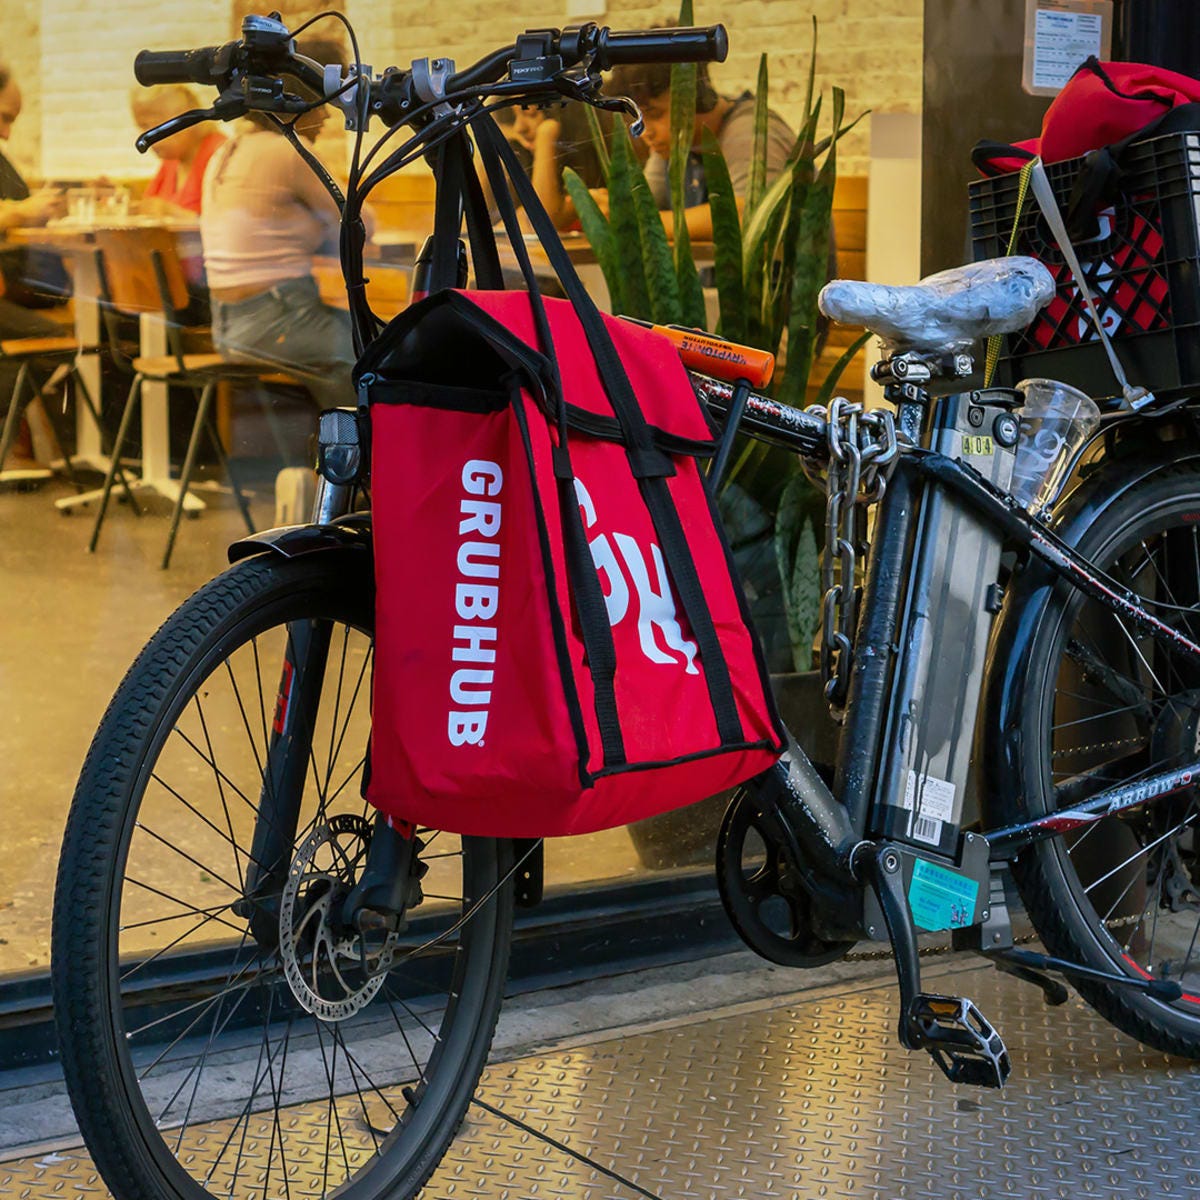 Grubhub Shows That Food Delivery Alone Won't Bring Profits - TheStreet